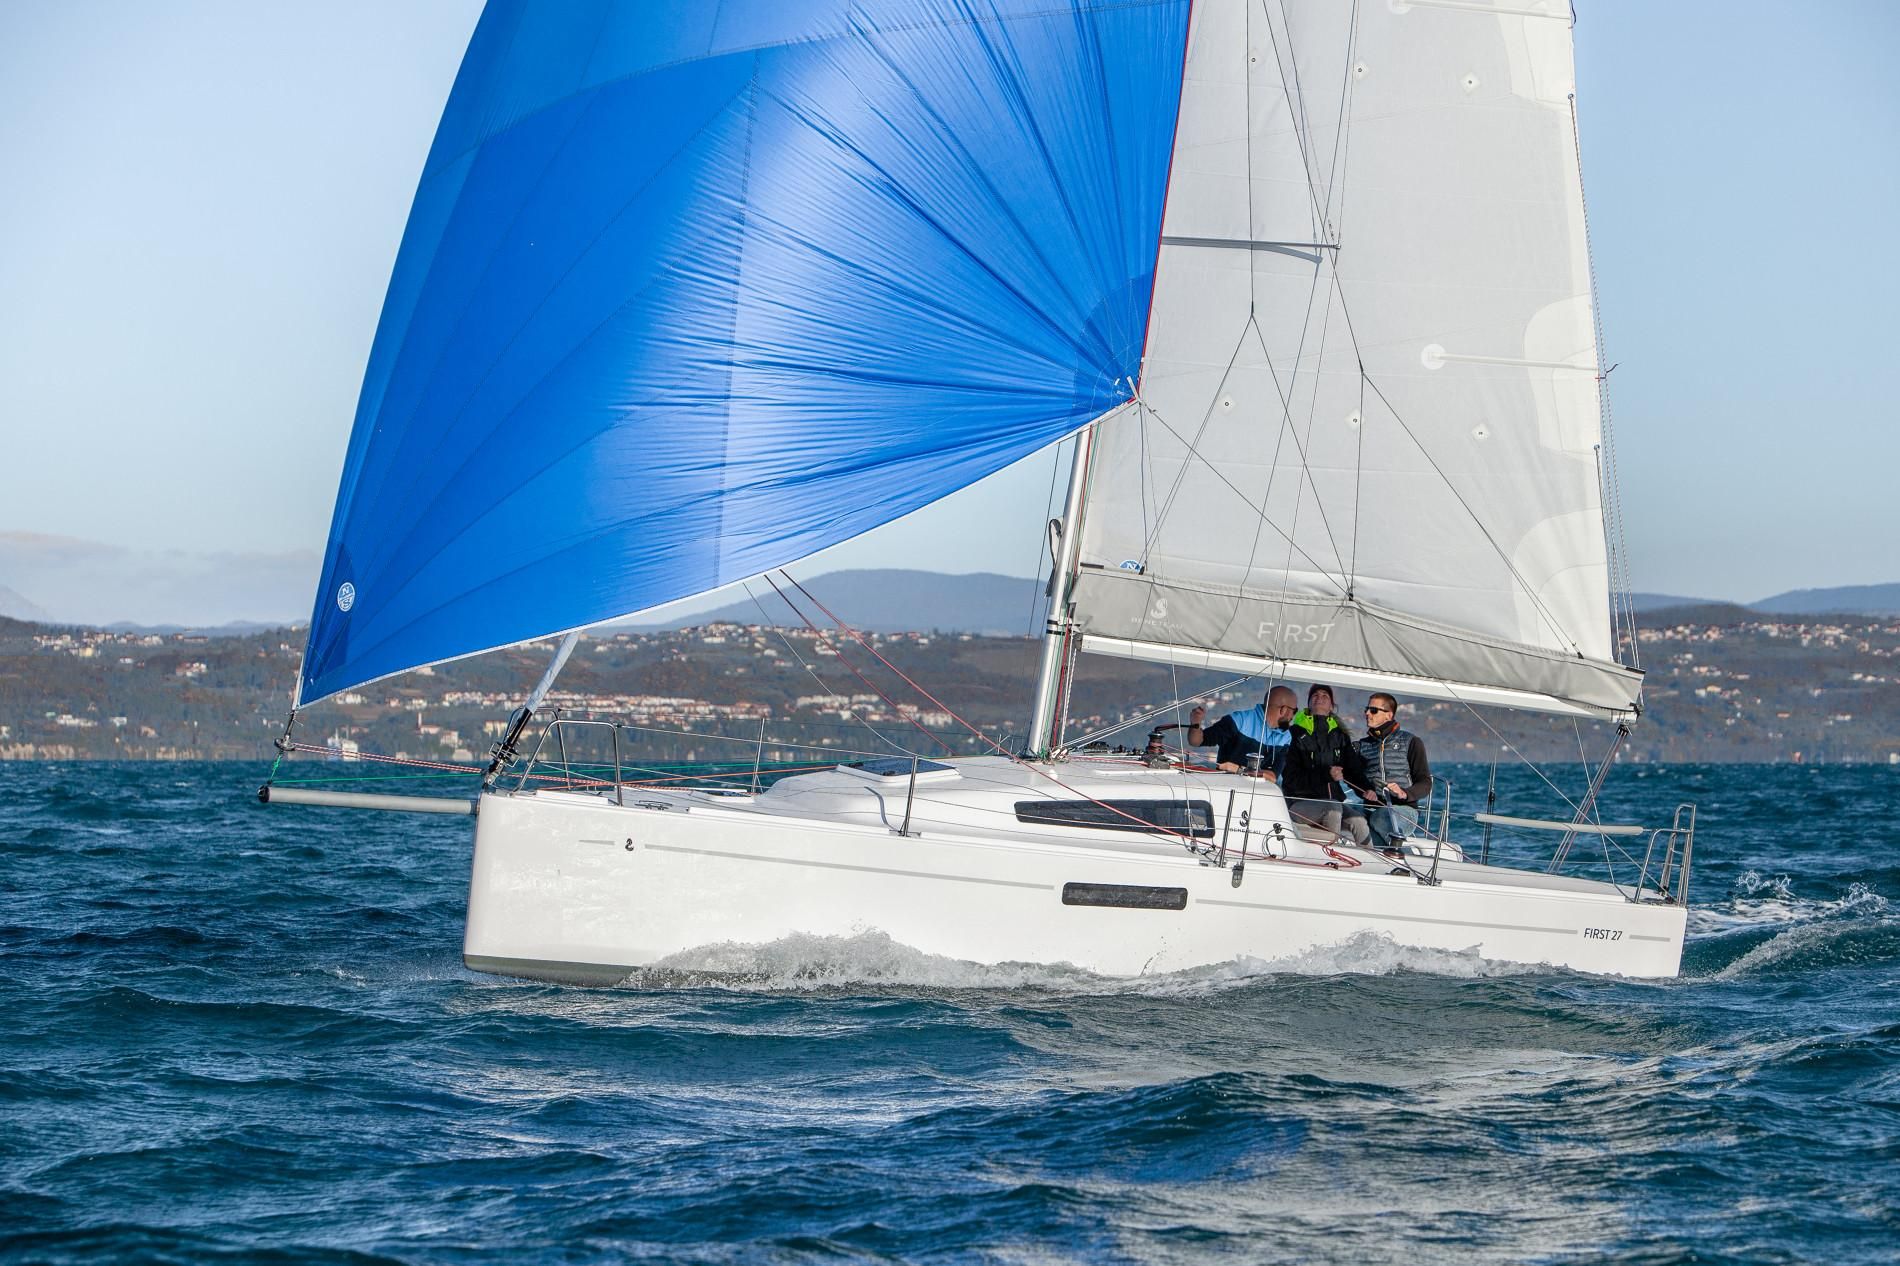 beneteau sailboats for sale in usa